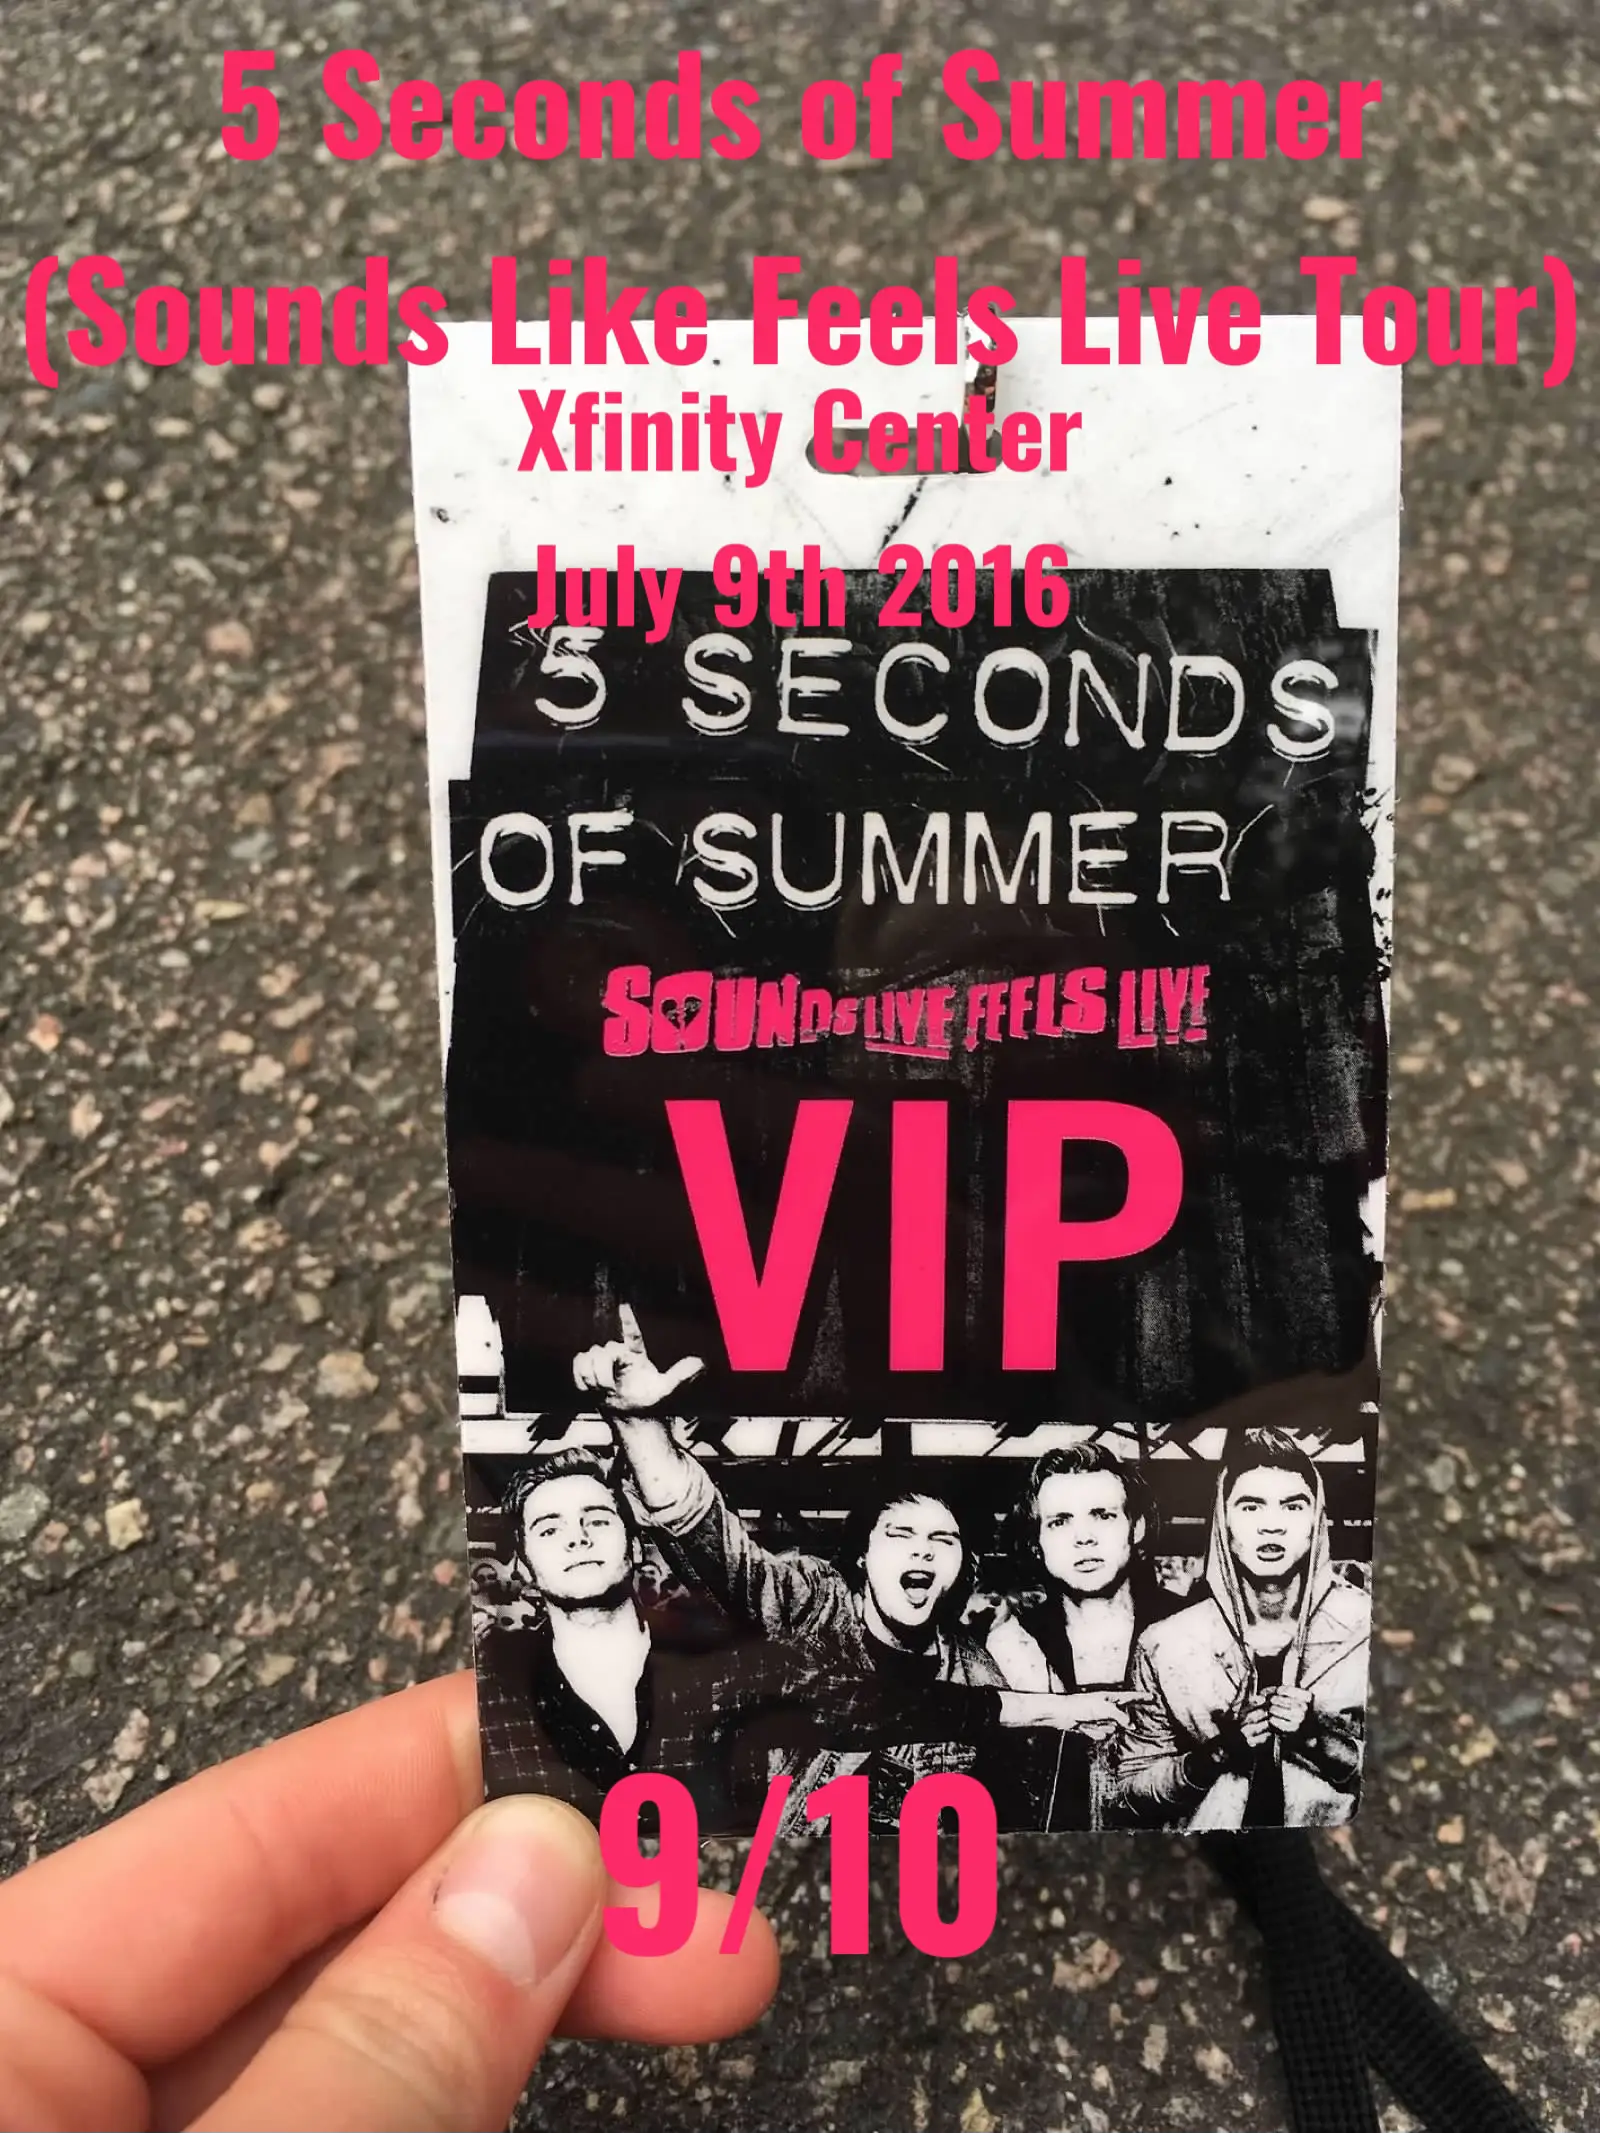  A person is holding a VIP ticket for 5 Seconds of Summer